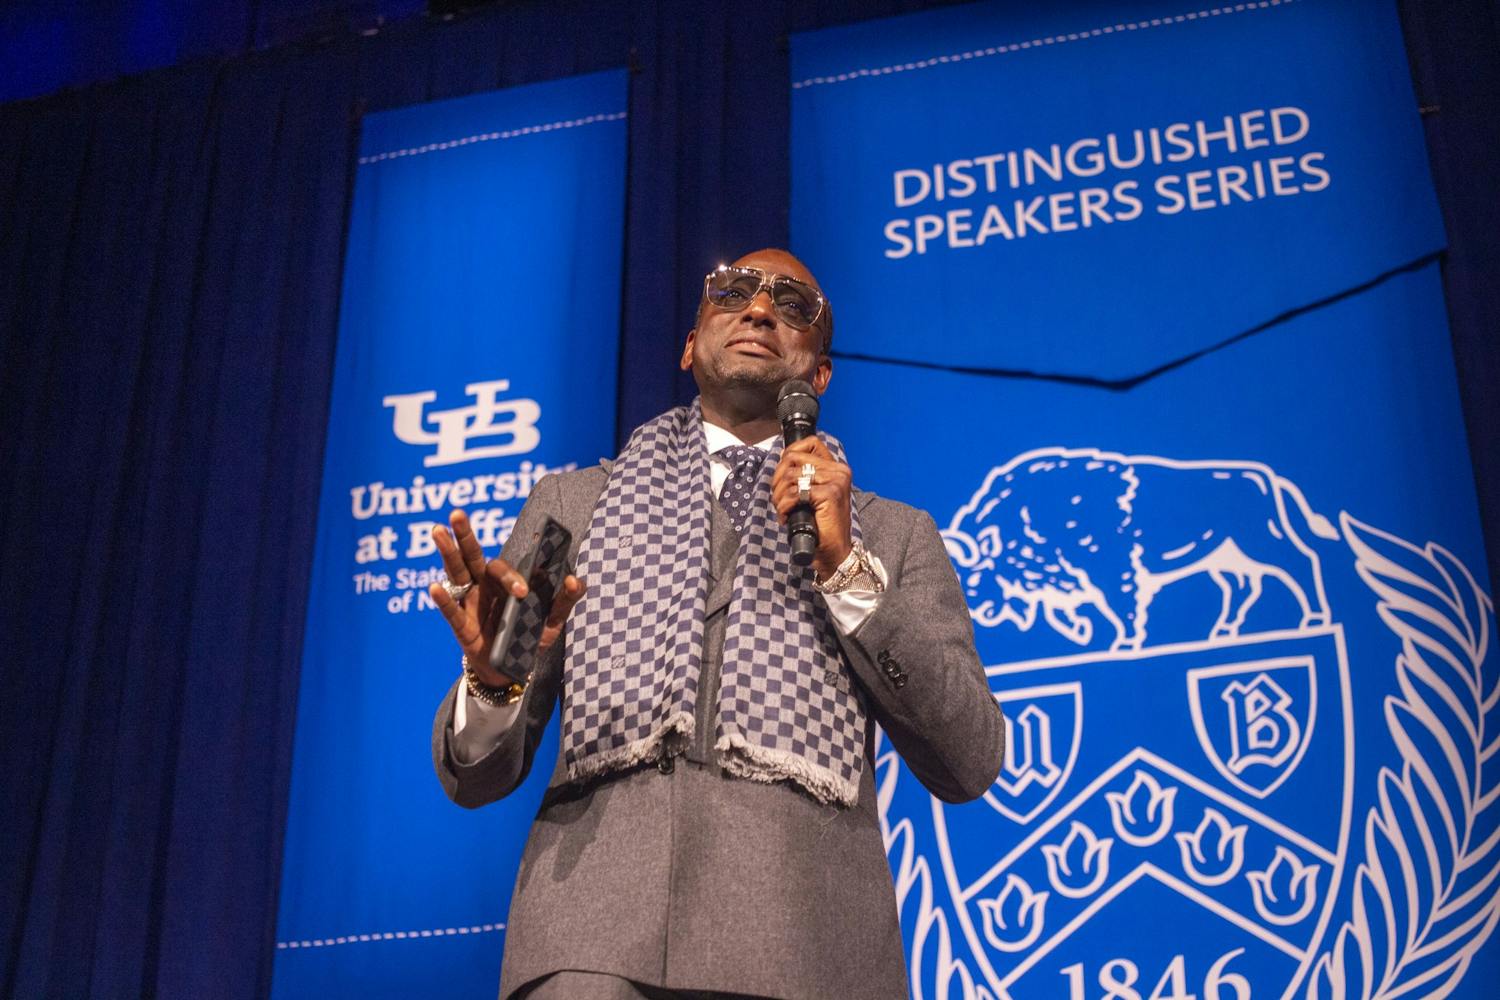 UB Distinguished speaker, Yusef Salaam shares his experiences as a criminal justice advocate and member of Central Park Five.